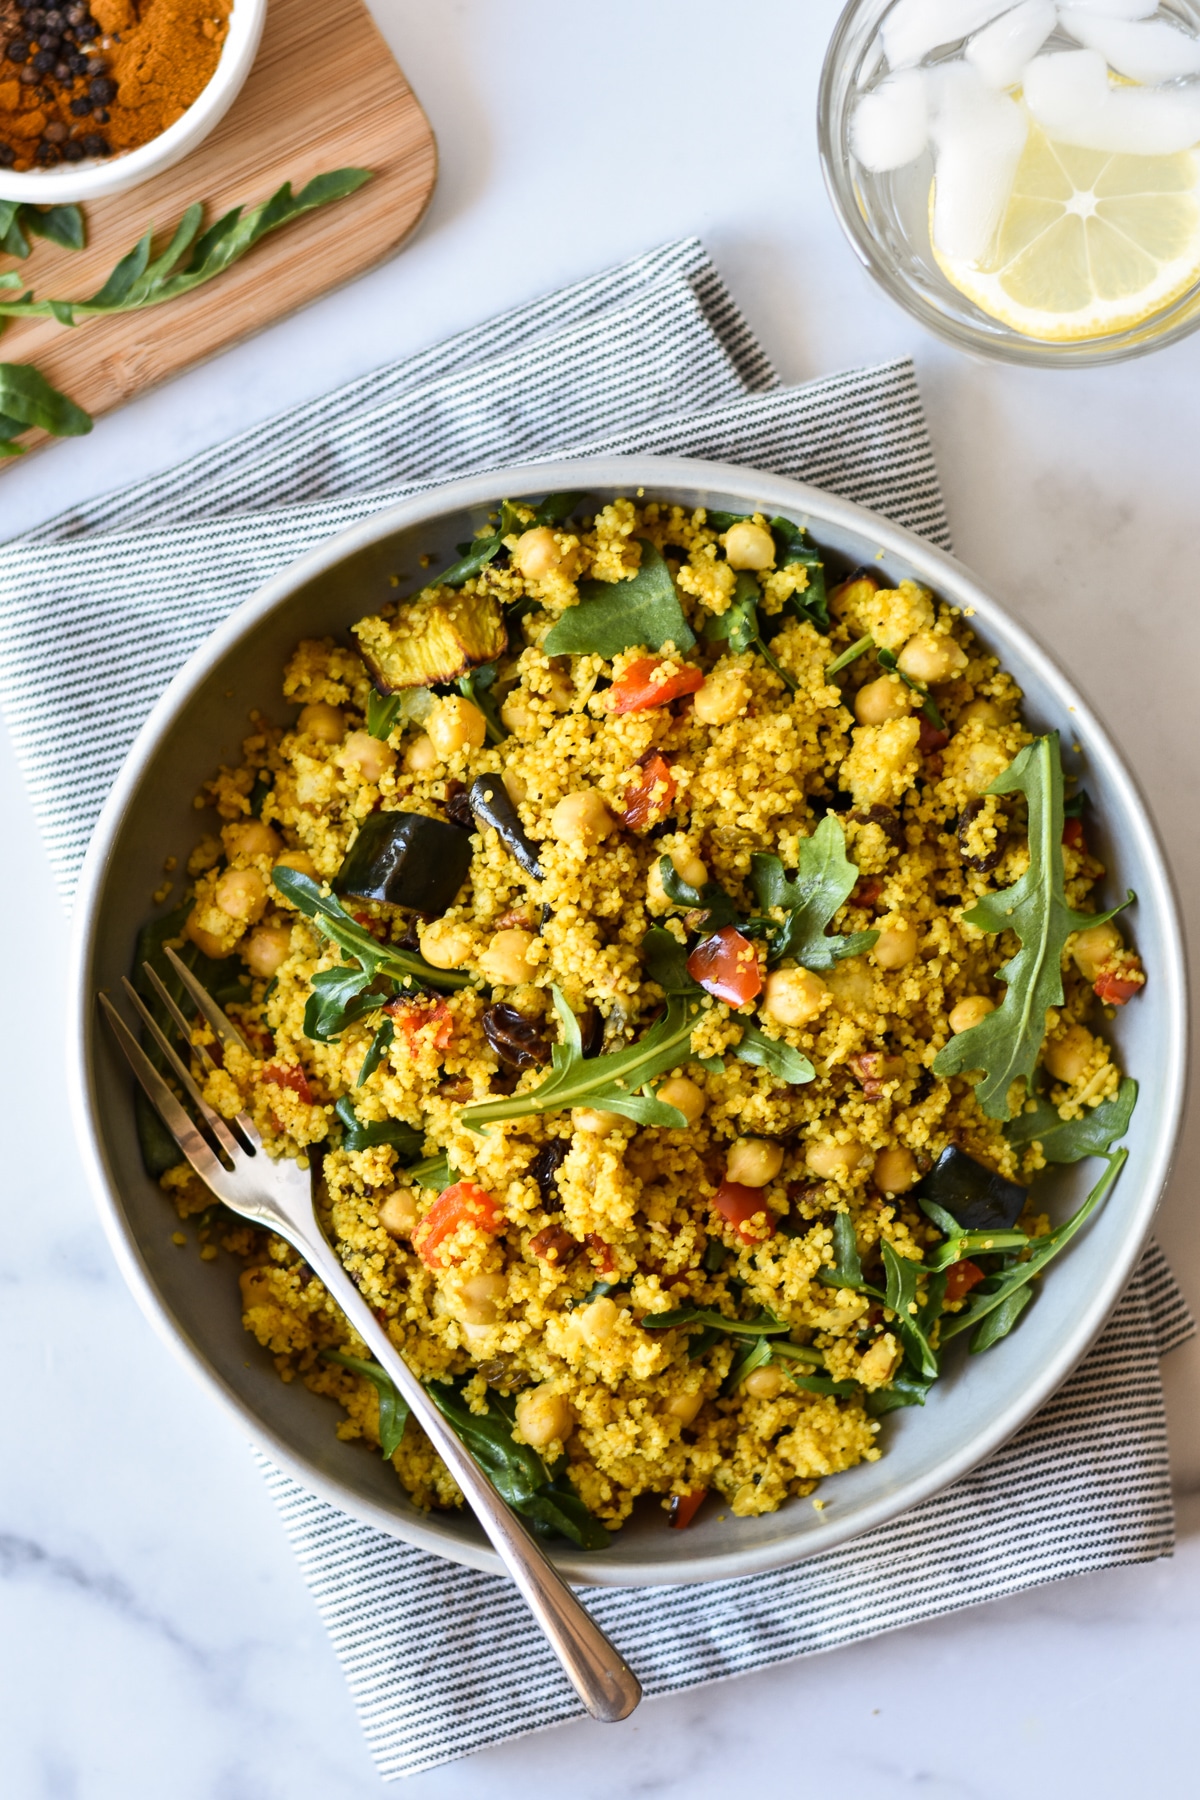 Spiced Millet Salad | Types of Grains: How To Store & Cook